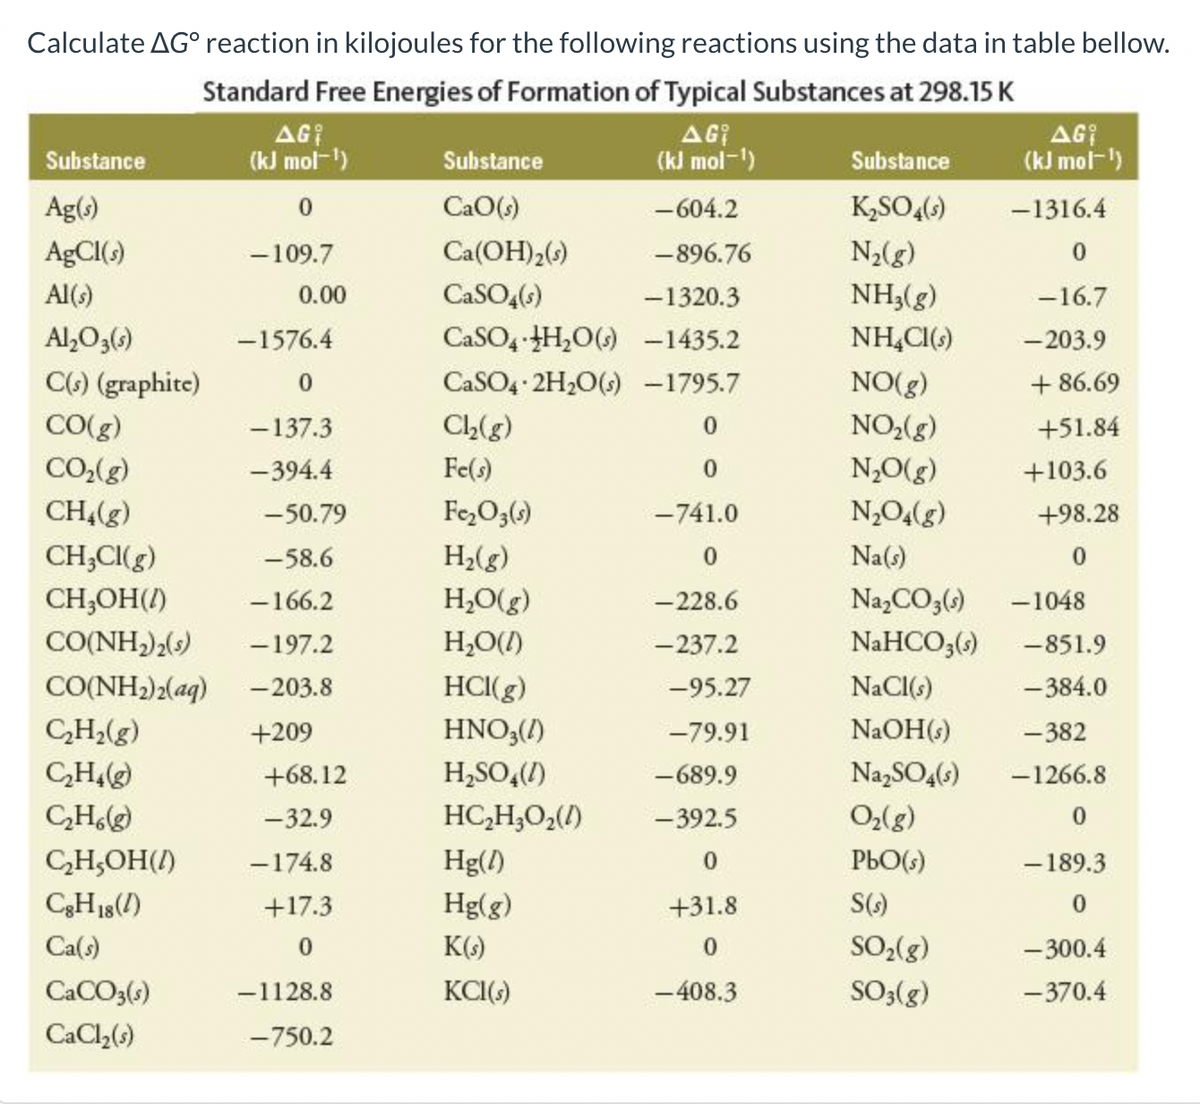 Calculate AGⓇ reaction in kilojoules for the following reactions using the data in table bellow.
Standard Free Energies of Formation of Typical Substances at 298.15 K
AG
(kJ mol-¹)
Substance
Ag(s)
AgCl(s)
Al(s)
Al₂O3(s)
C(s) (graphite)
CO(g)
CO₂(g)
CH₂(g)
-50.79
CH₂Cl(g)
-58.6
CH₂OH(1)
- 166.2
CO(NH,)2(s) -197.2
CO(NH2)2(aq) -203.8
+209
C₂H₂(g)
C₂H4(g)
C₂H6(g)
C₂H₂OH()
CgH 18 (1)
Ca(s)
AG
(kJ mol-¹)
0
-109.7
CaCO3(s)
CaCl₂(s)
0.00
-1576.4
0
- 137.3
-394.4
+68.12
-32.9
-174.8
+17.3
0
-1128.8
-750.2
Substance
CaO(s)
Ca(OH)2 (s)
CaSO4(s)
CaSO4 H₂O(s)
CaSO4 2H₂O(s)
Ch₂(g)
Fe(s)
Fe₂O3(s)
H₂(g)
H₂O(g)
H₂O(l)
HCI(g)
HNO3(1)
H₂SO4(1)
HC,H,O,(0)
Hg(1)
Hg(g)
K(s)
KCI(s)
-604.2
-896.76
-1320.3
-1435.2
-1795.7
0
0
-741.0
0
-228.6
-237.2
-95.27
-79.91
-689.9
-392.5
0
+31.8
0
-408.3
Substance
K₂SO4(s)
N₂(g)
NH3(g)
NH4Cl(s)
NO(g)
NO₂(g)
N₂O(g)
N₂O4(g)
Na(s)
Na₂CO3(s)
NaHCO3(s)
NaCl(s)
NaOH(s)
Na₂SO4(s)
O₂(g)
PbO(s)
S(s)
SO₂(g)
SO3(g)
AG
(kJ mol-¹)
-1316.4
0
-16.7
-203.9
+86.69
+51.84
+103.6
+98.28
0
-1048
-851.9
-384.0
-382
-1266.8
0
-189.3
0
-300.4
-370.4